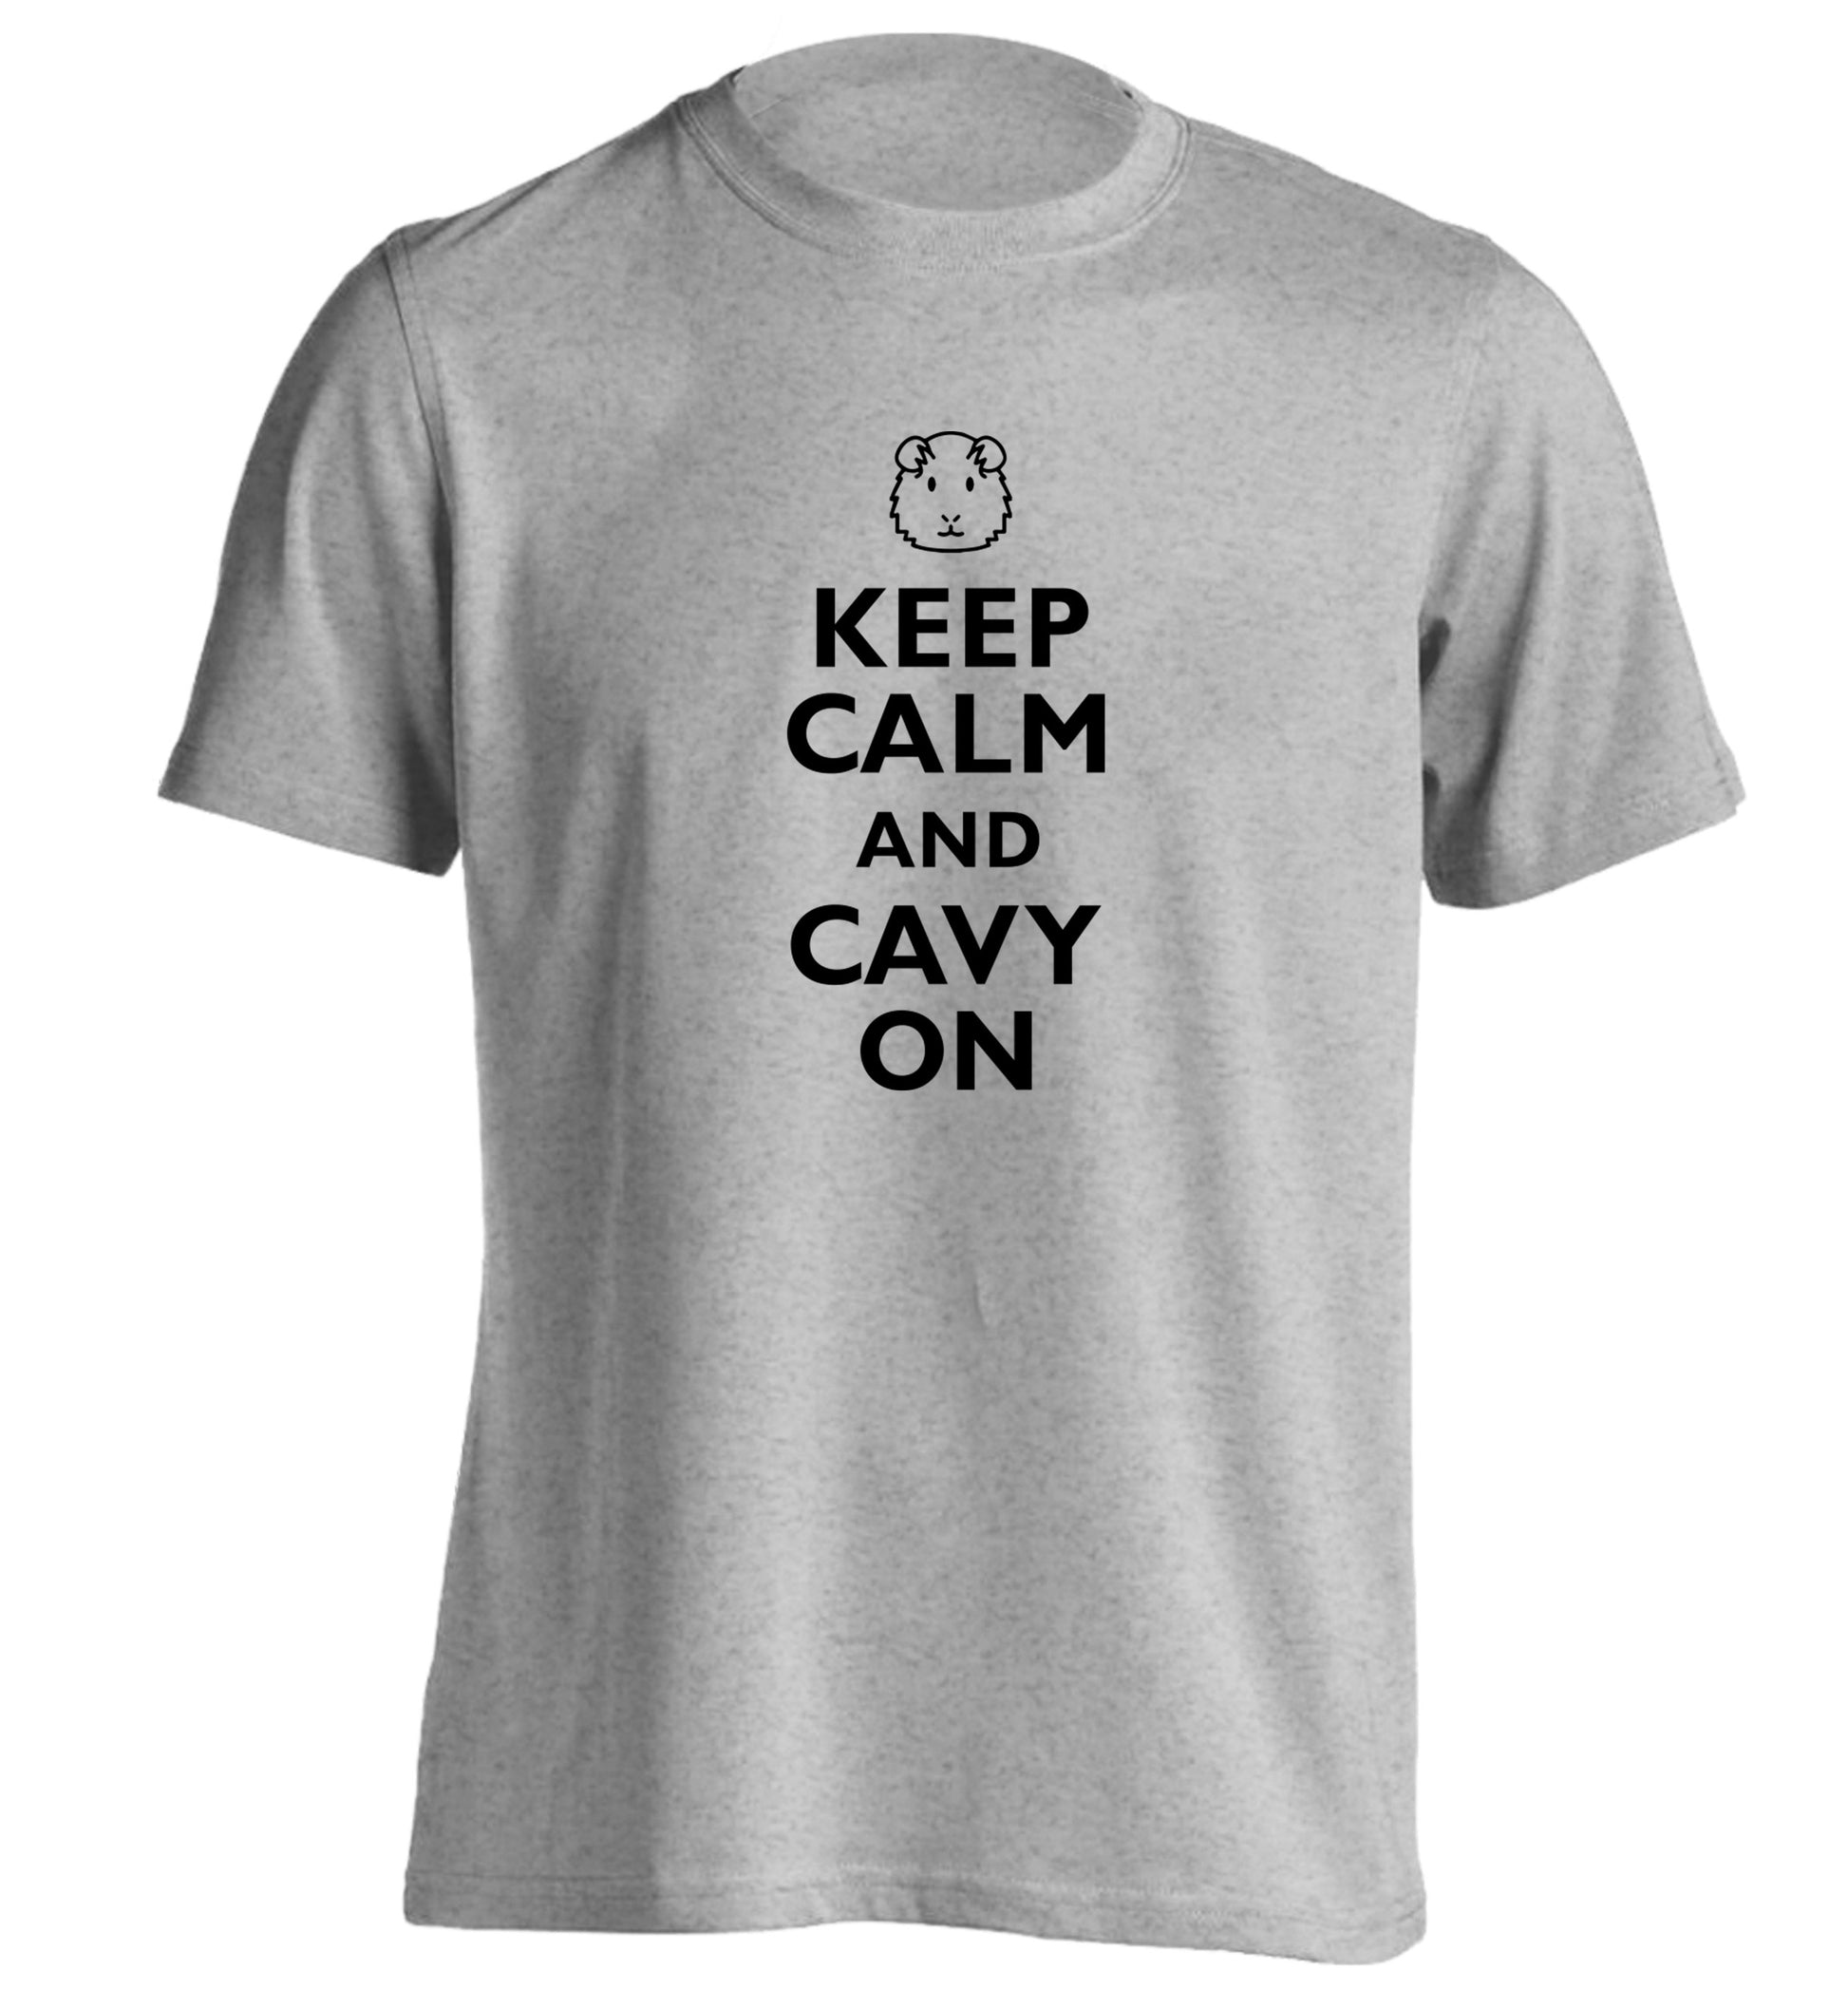 Keep calm and cavvy on adults unisex grey Tshirt 2XL